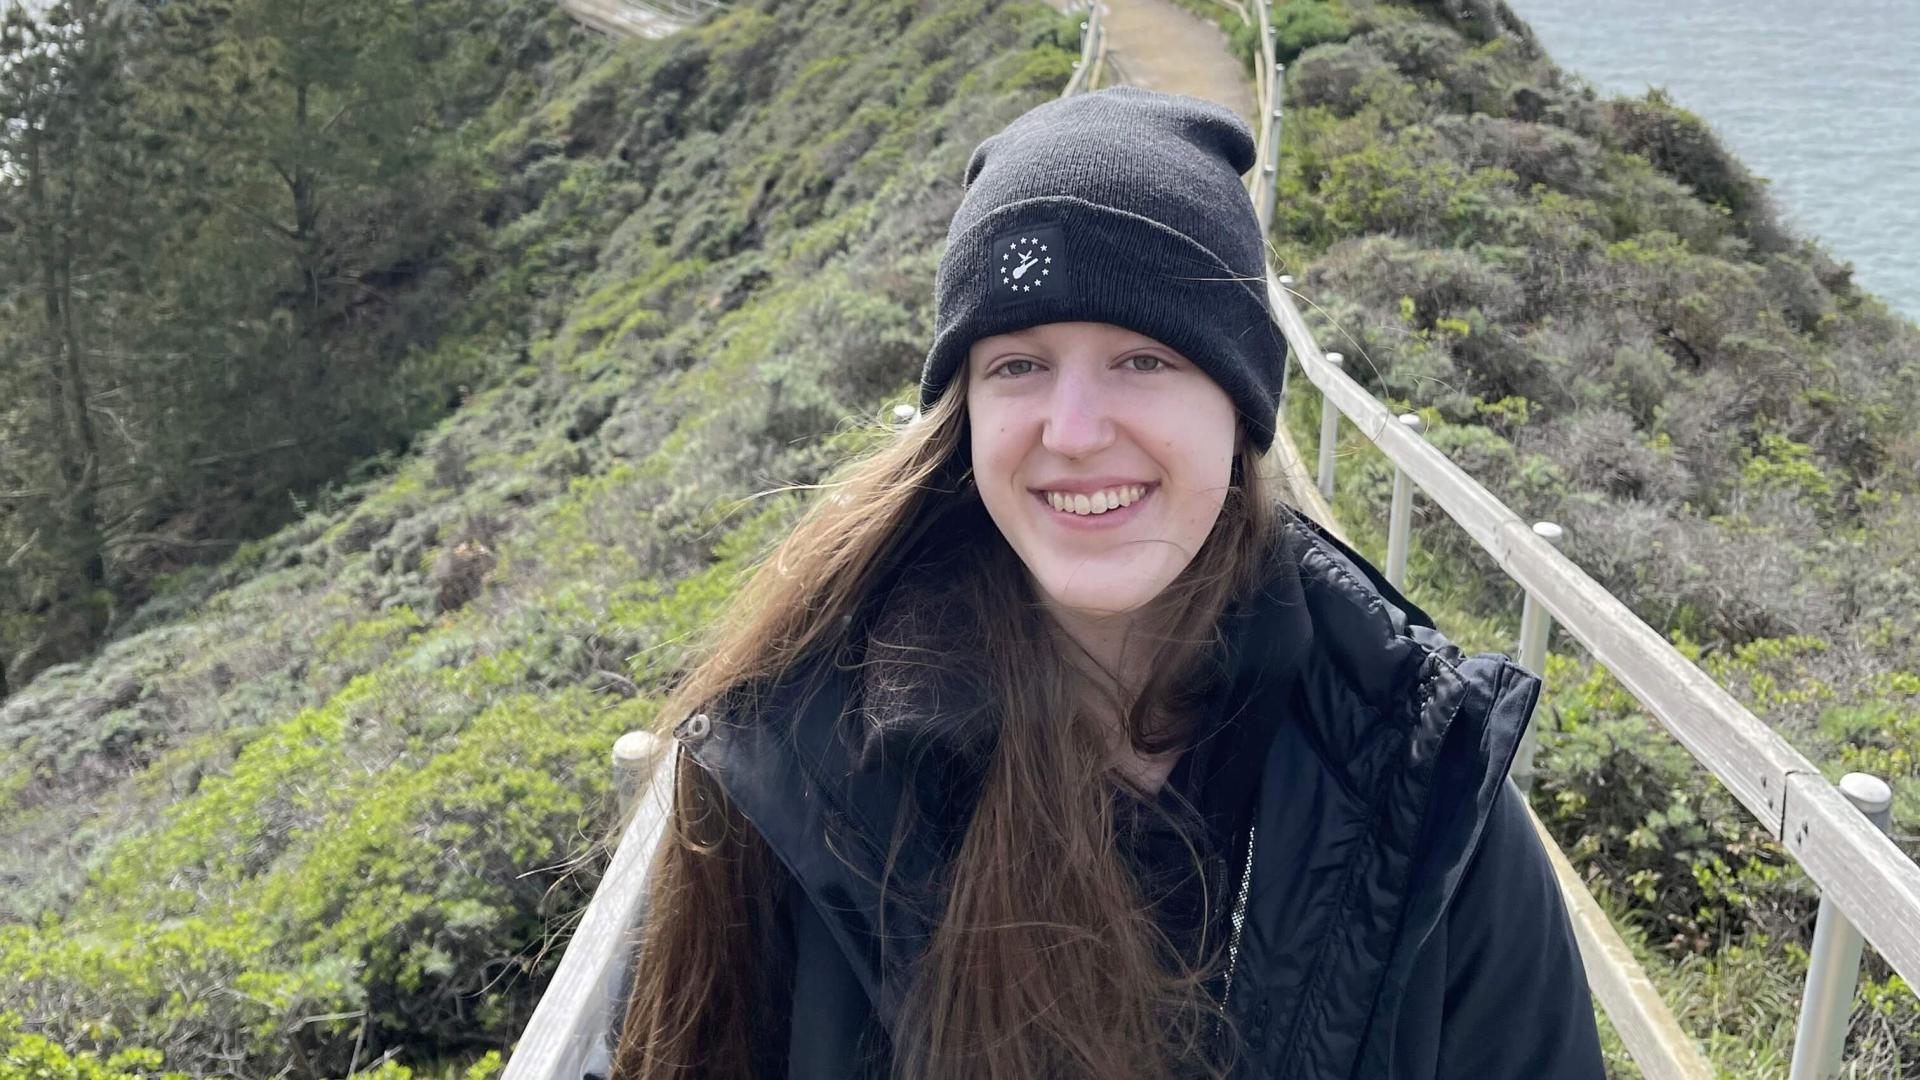 Anna smiling on a bridge on top of a mountain.